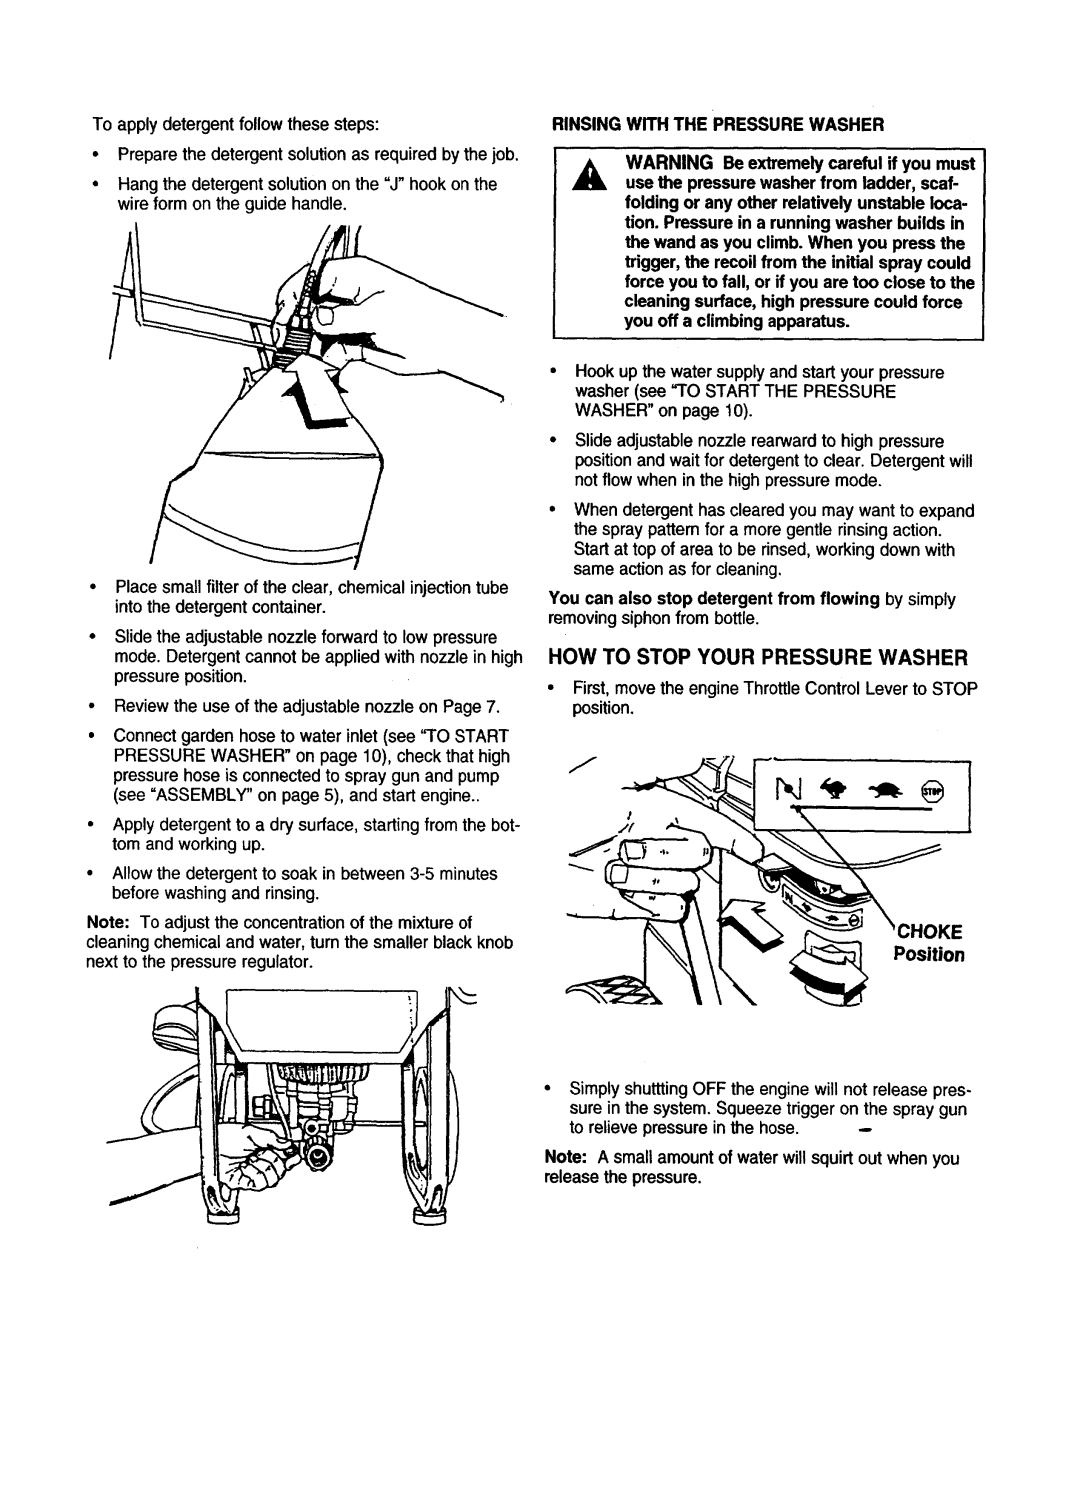 Craftsman 580.76225 owner manual Toapplydetergentfollowthesesteps, How To Stop Your Pressure Washer 